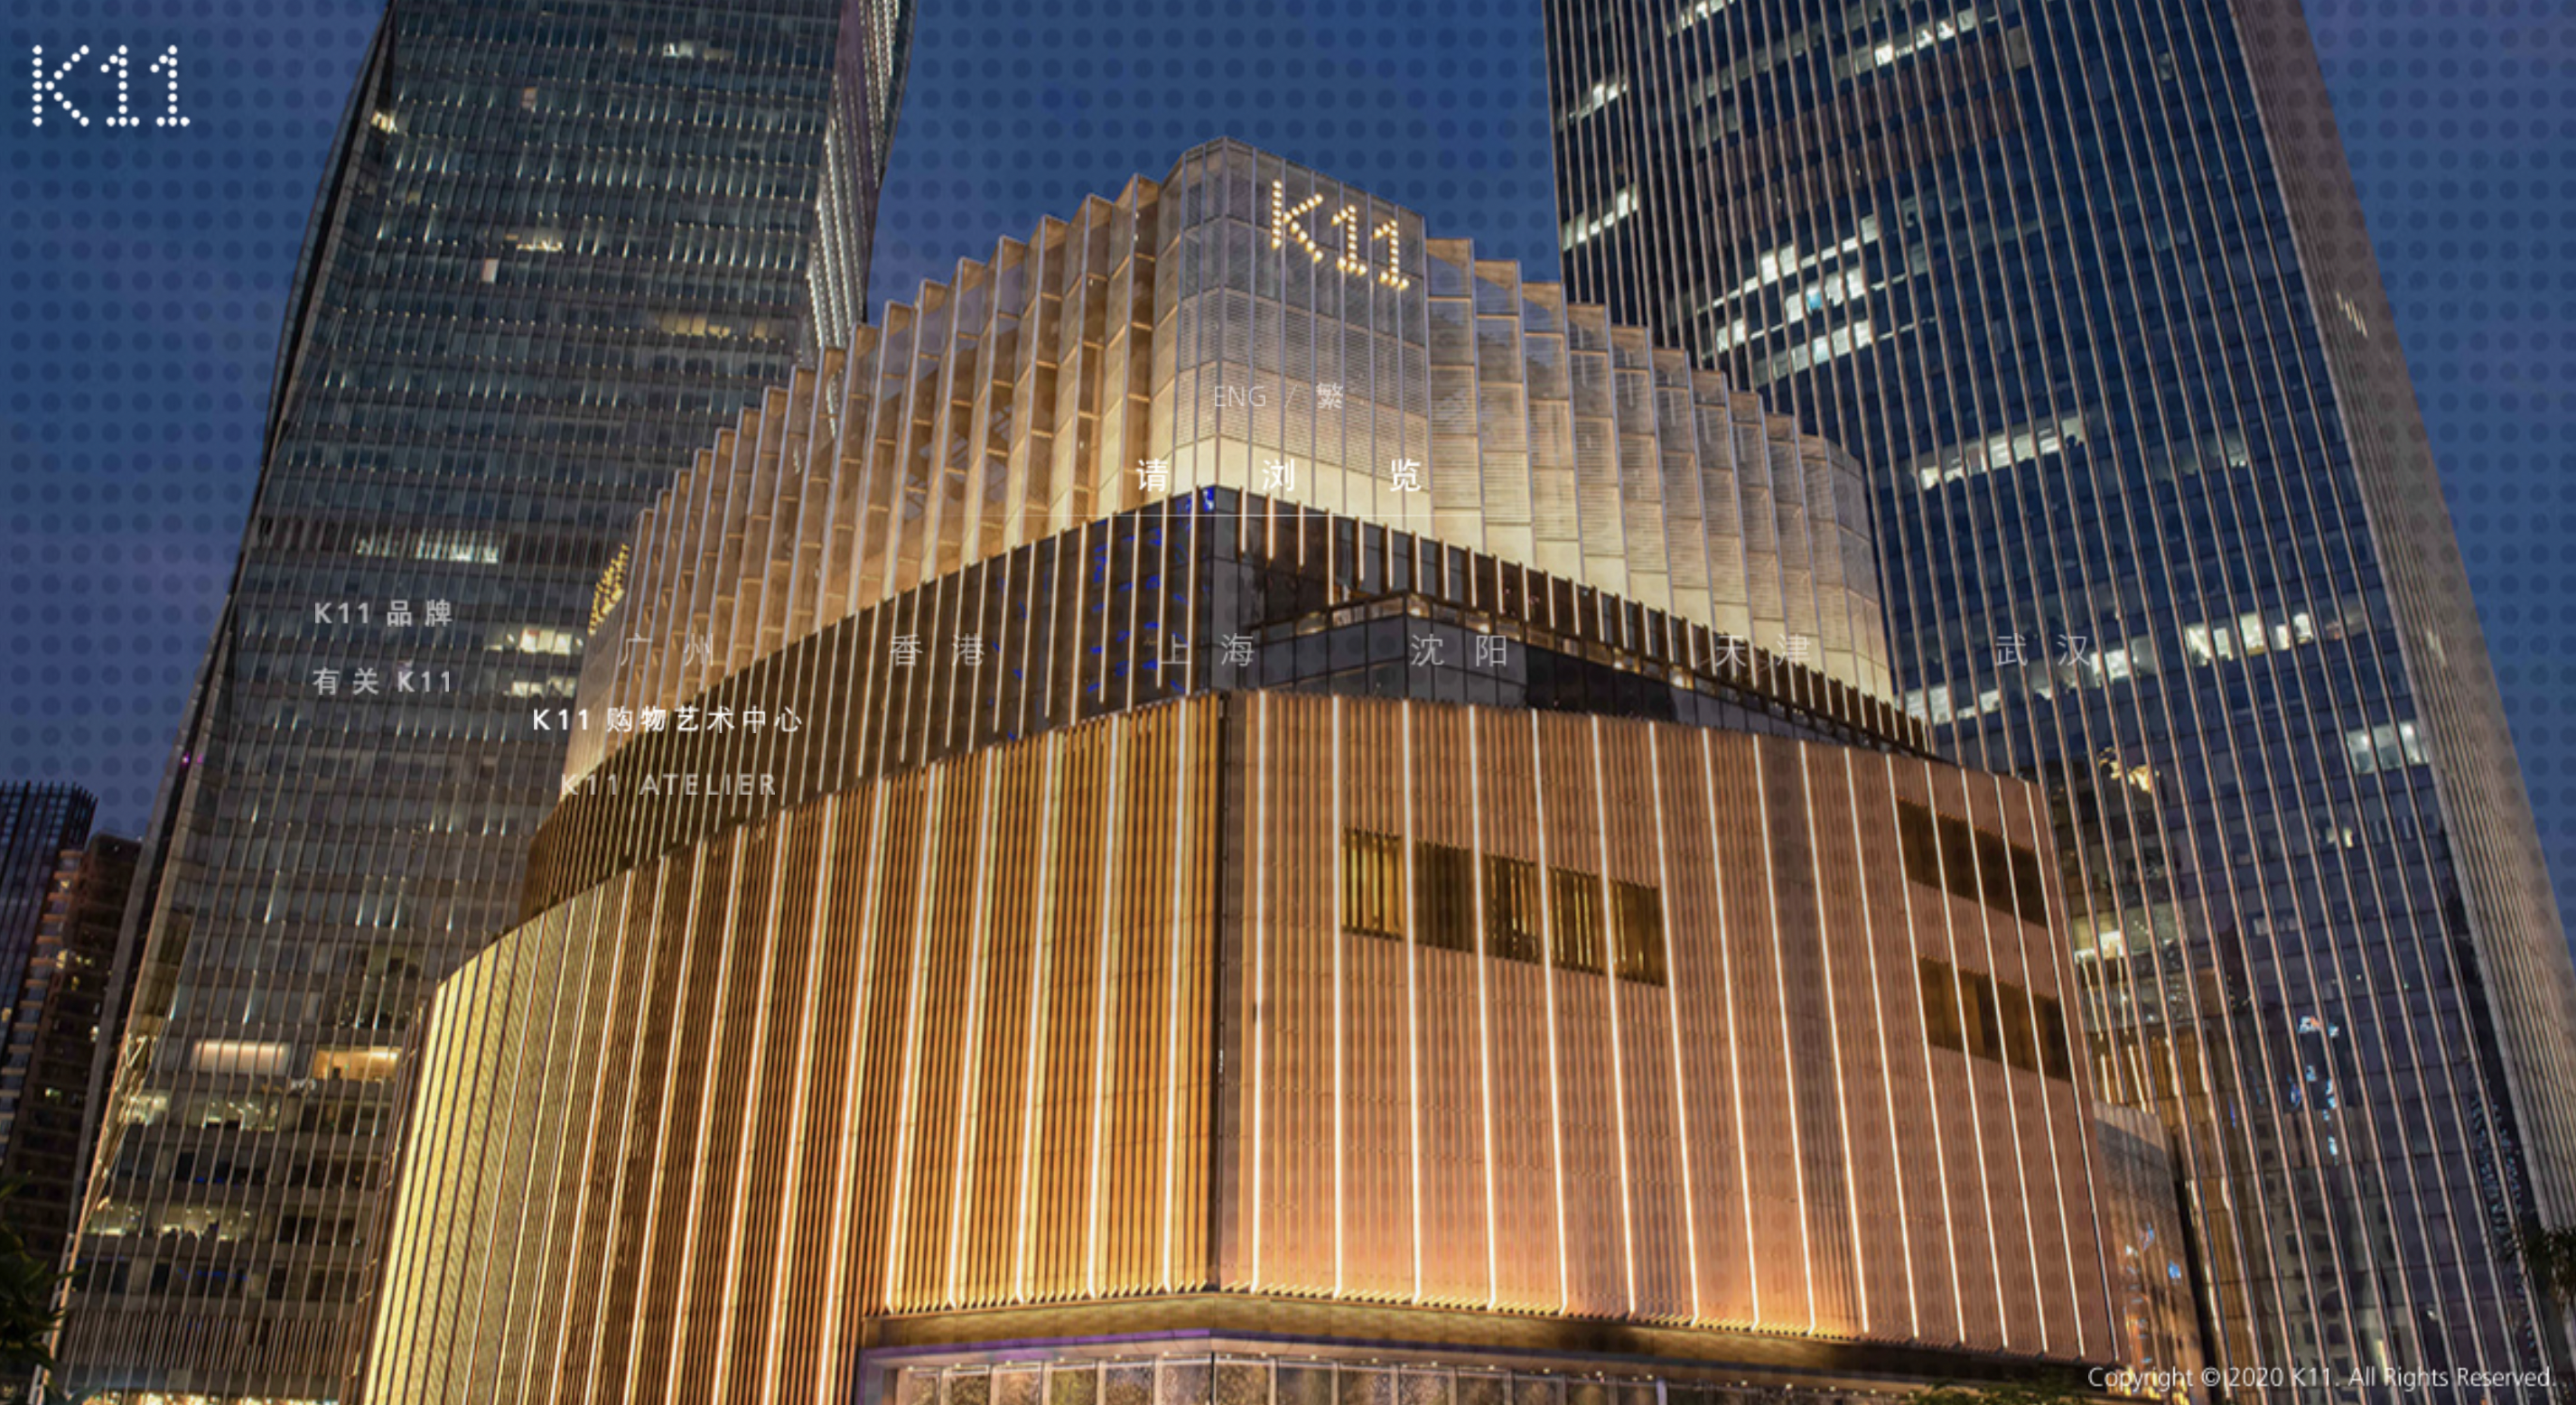 New World Development’s Total Revenue Exceeds HK$40 Billion in the First Half of the Fiscal Year, With Shanghai K11 Membership Sales Accounting For Nearly 70%